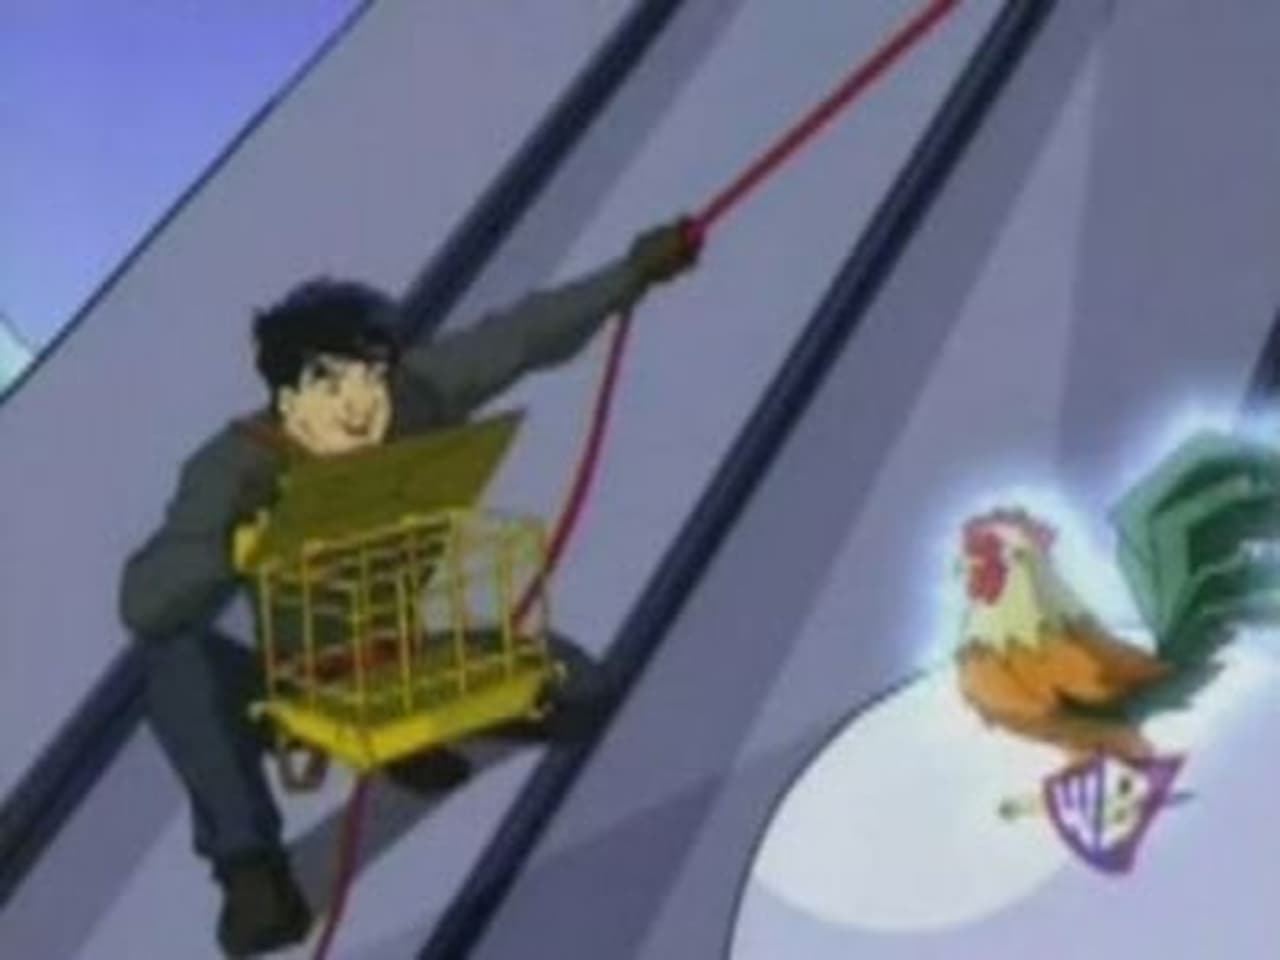 Jackie Chan Adventures - Season 3 Episode 6 : When Pigs Fly